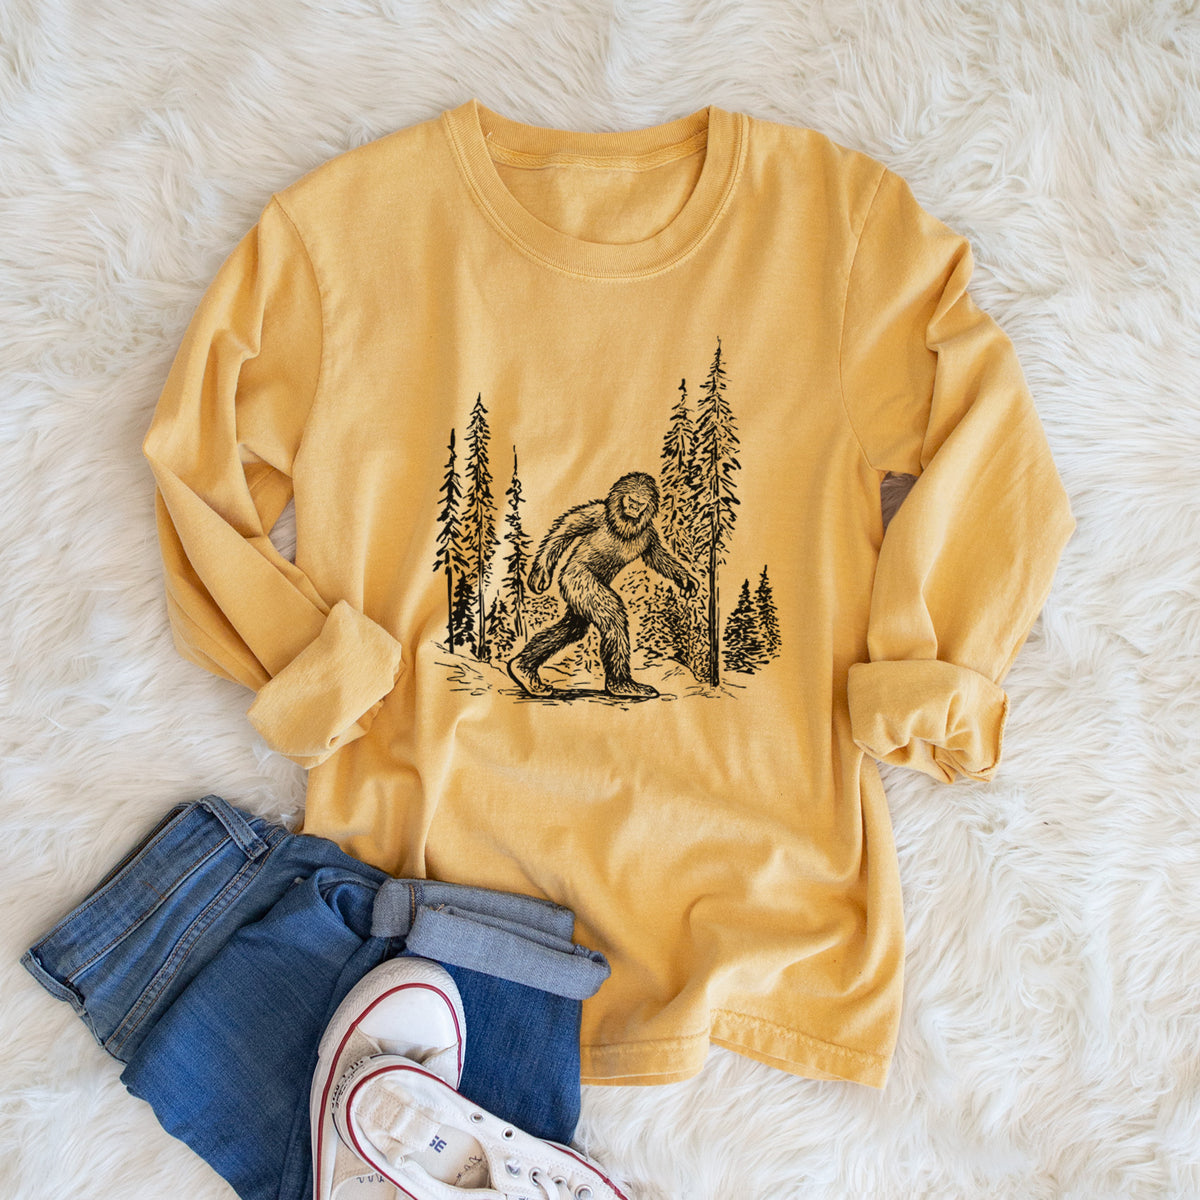 Bigfoot in the Woods - Heavyweight 100% Cotton Long Sleeve